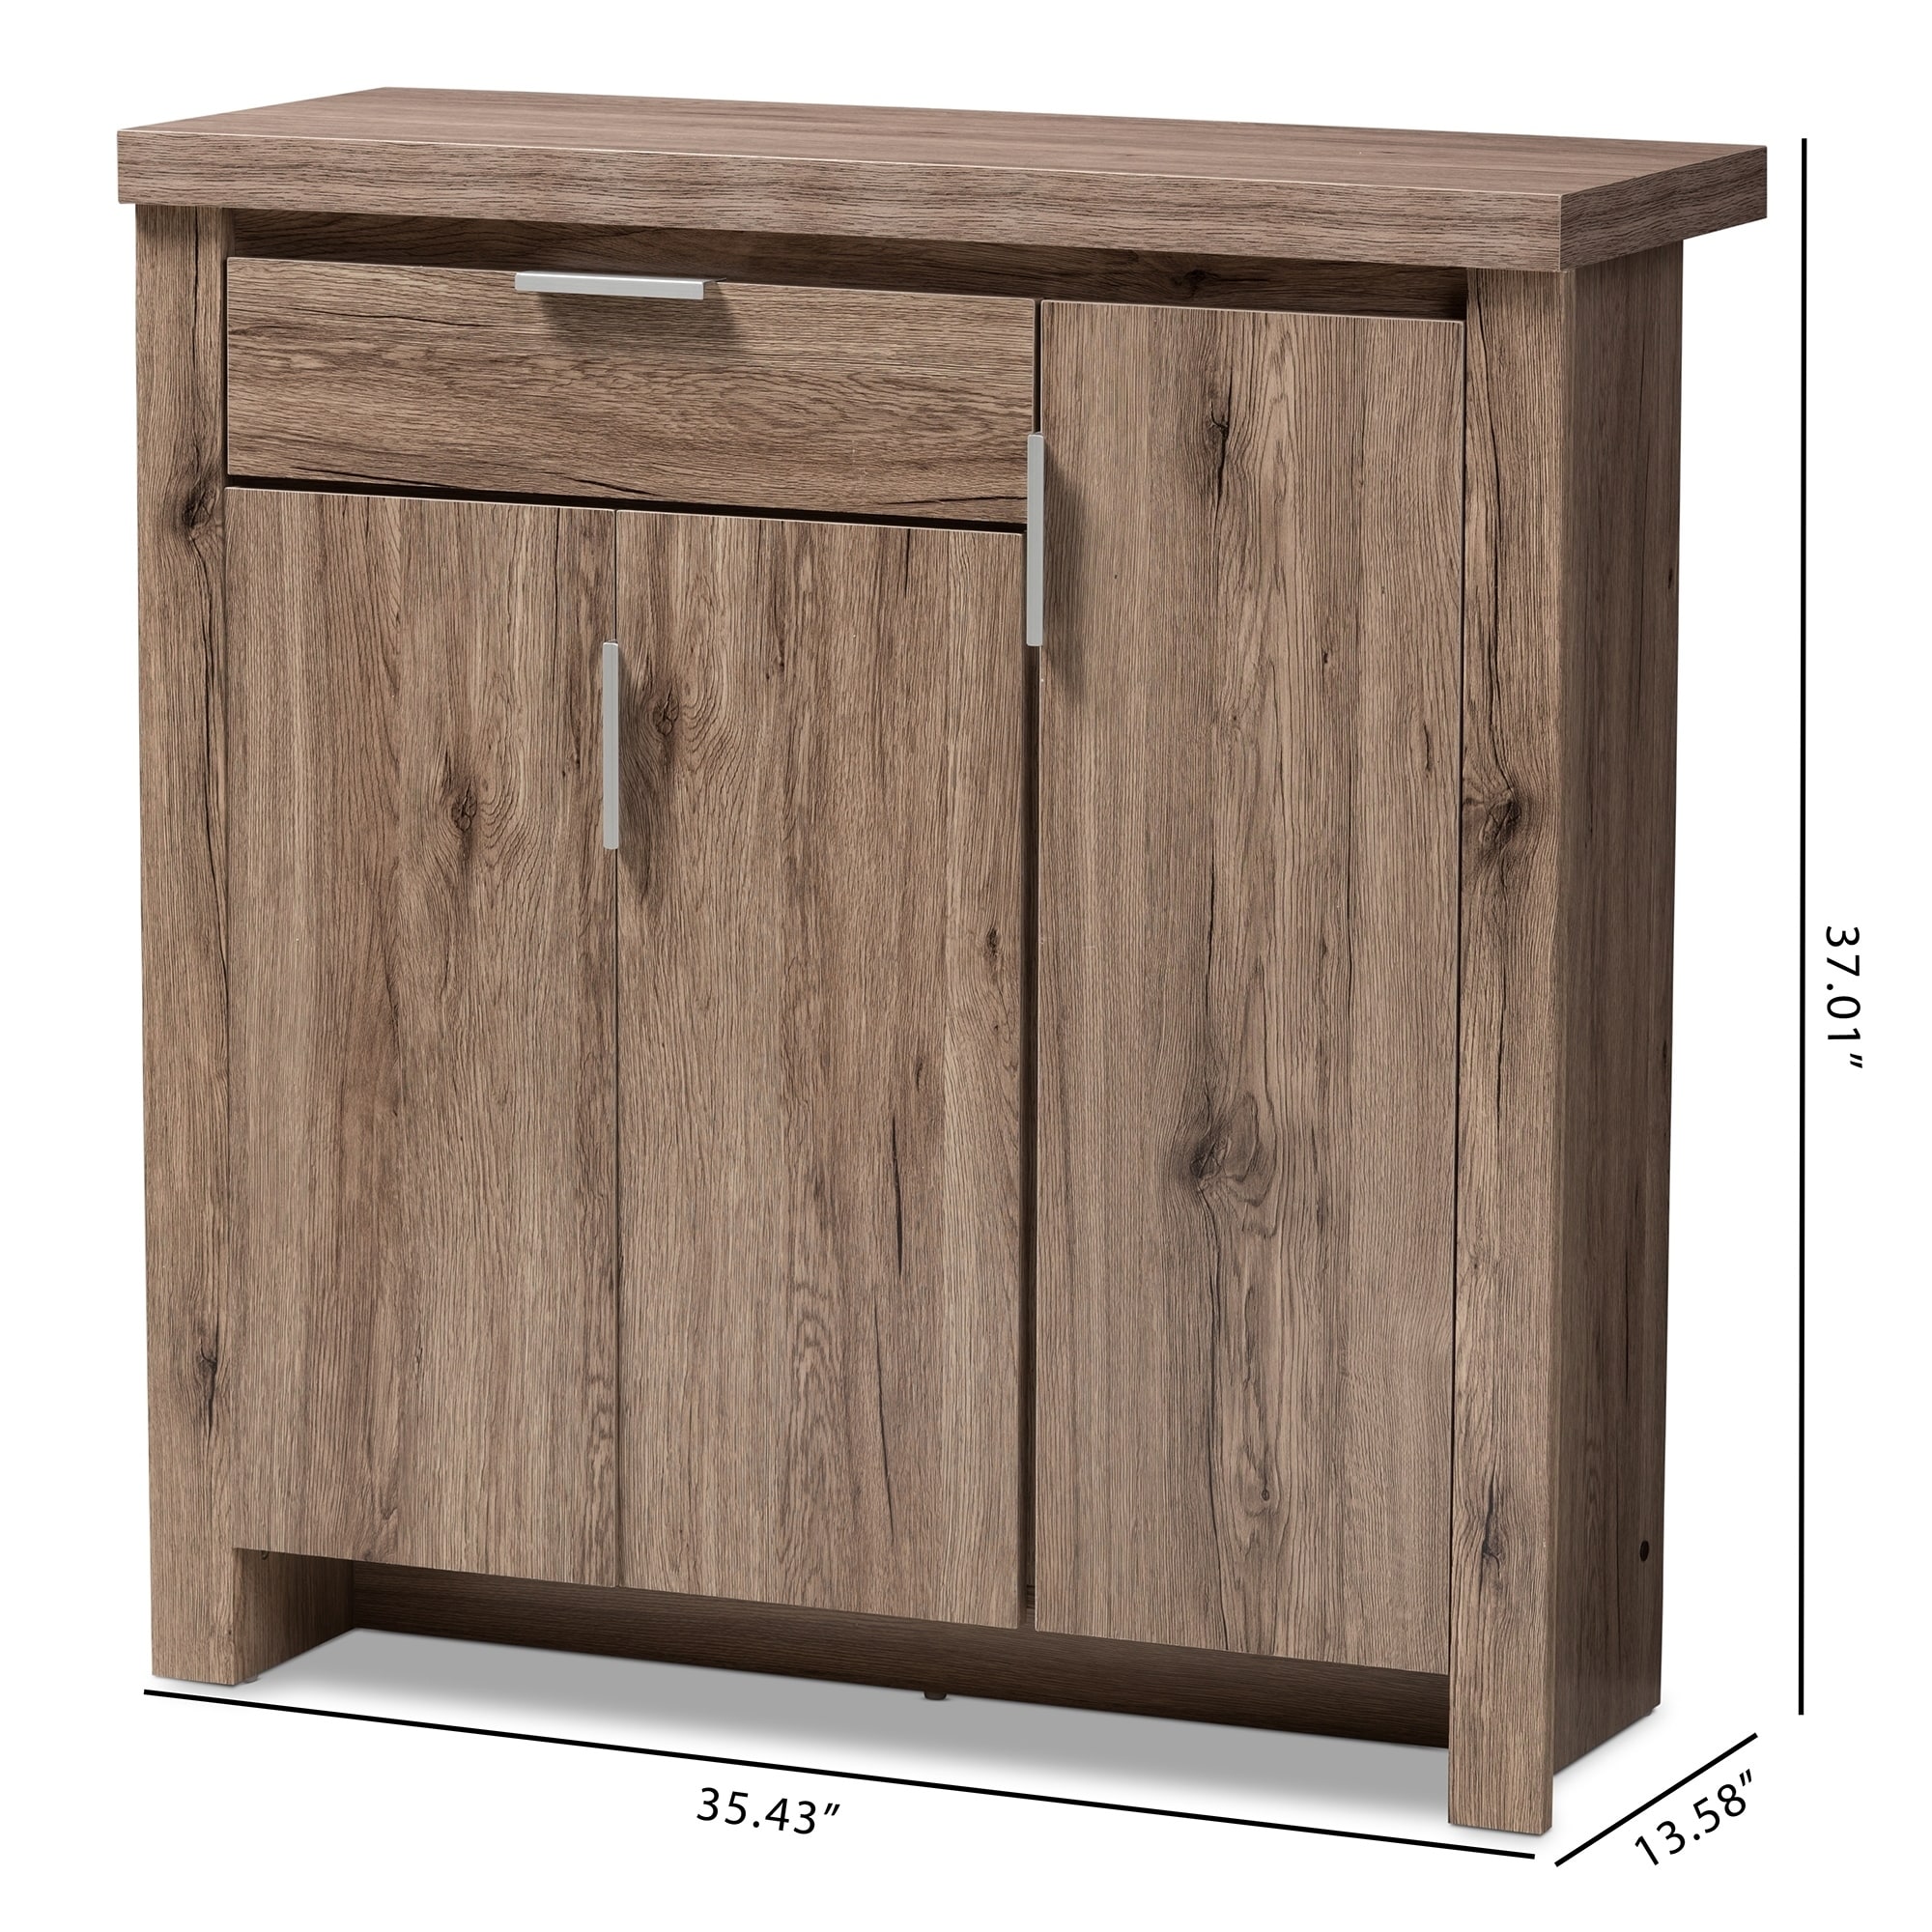 https://ak1.ostkcdn.com/images/products/22580569/Contemporary-Oak-Brown-Shoe-Cabinet-by-Baxton-Studio-3d54890d-0a09-454c-89f6-3f86ef475119.jpg